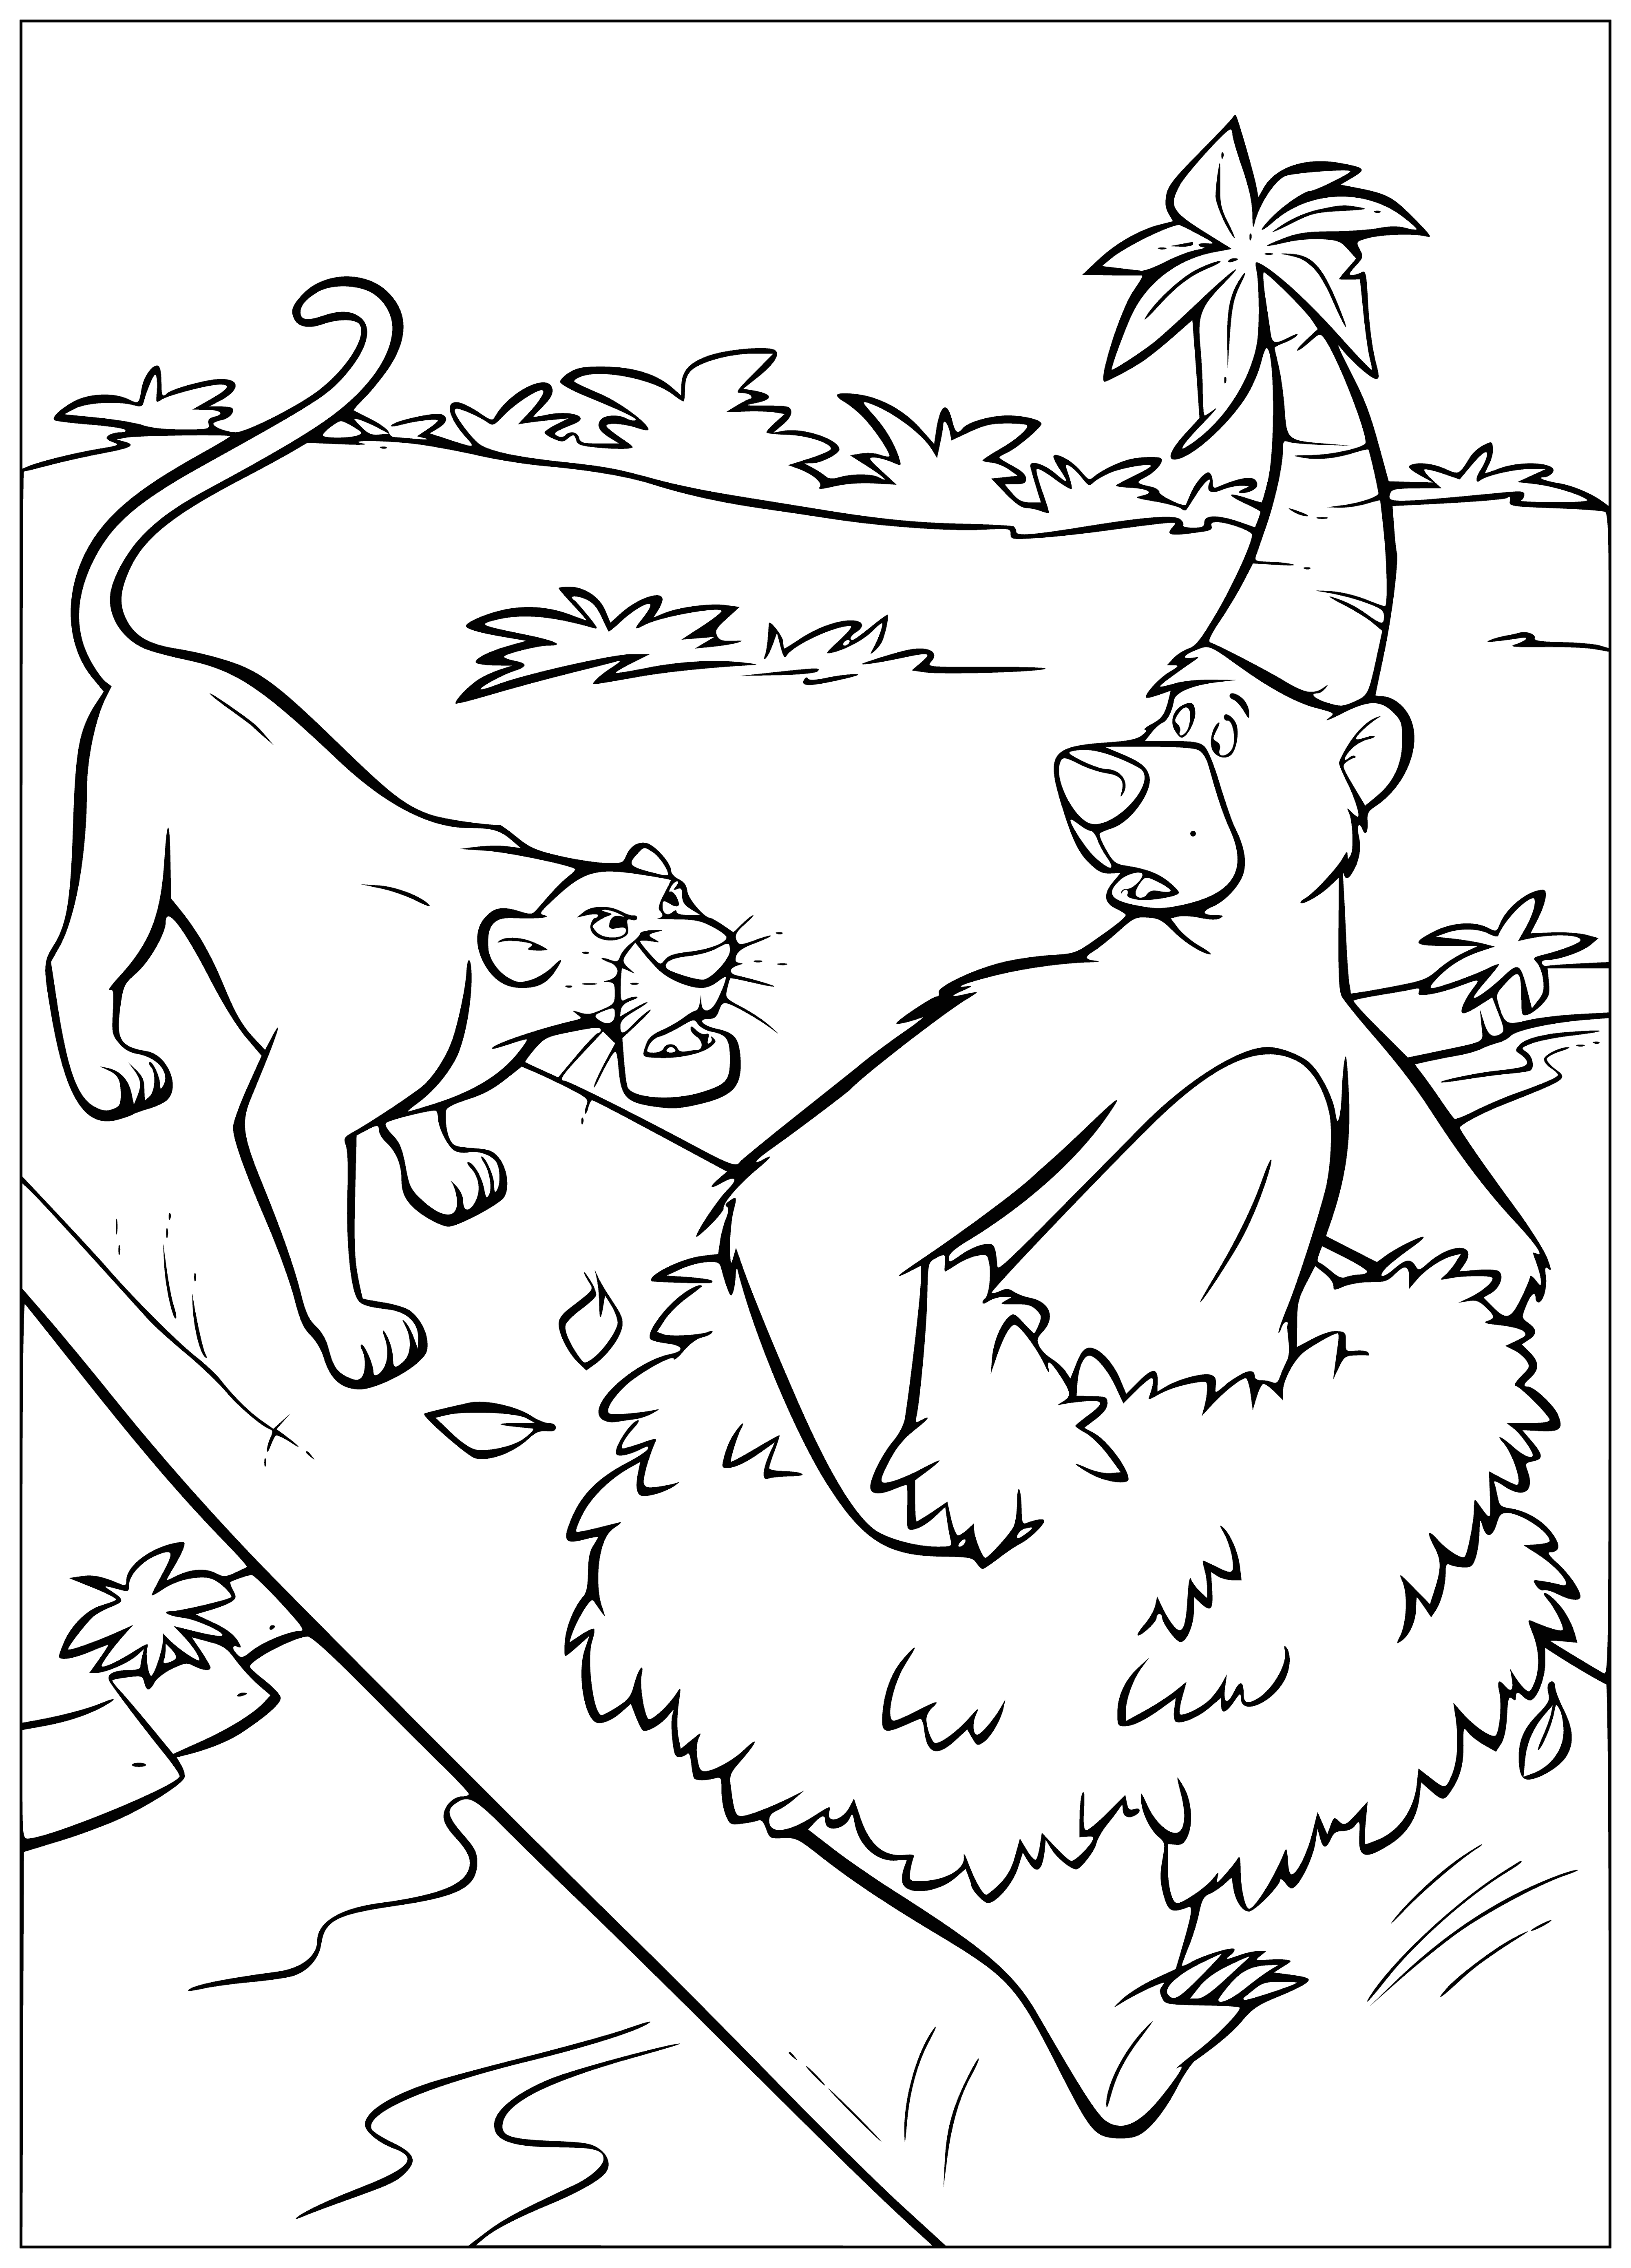 coloring page: Two friends, Bagira the tiger and Balu the monkey, look happy in their jungle home. #FriendshipGoals